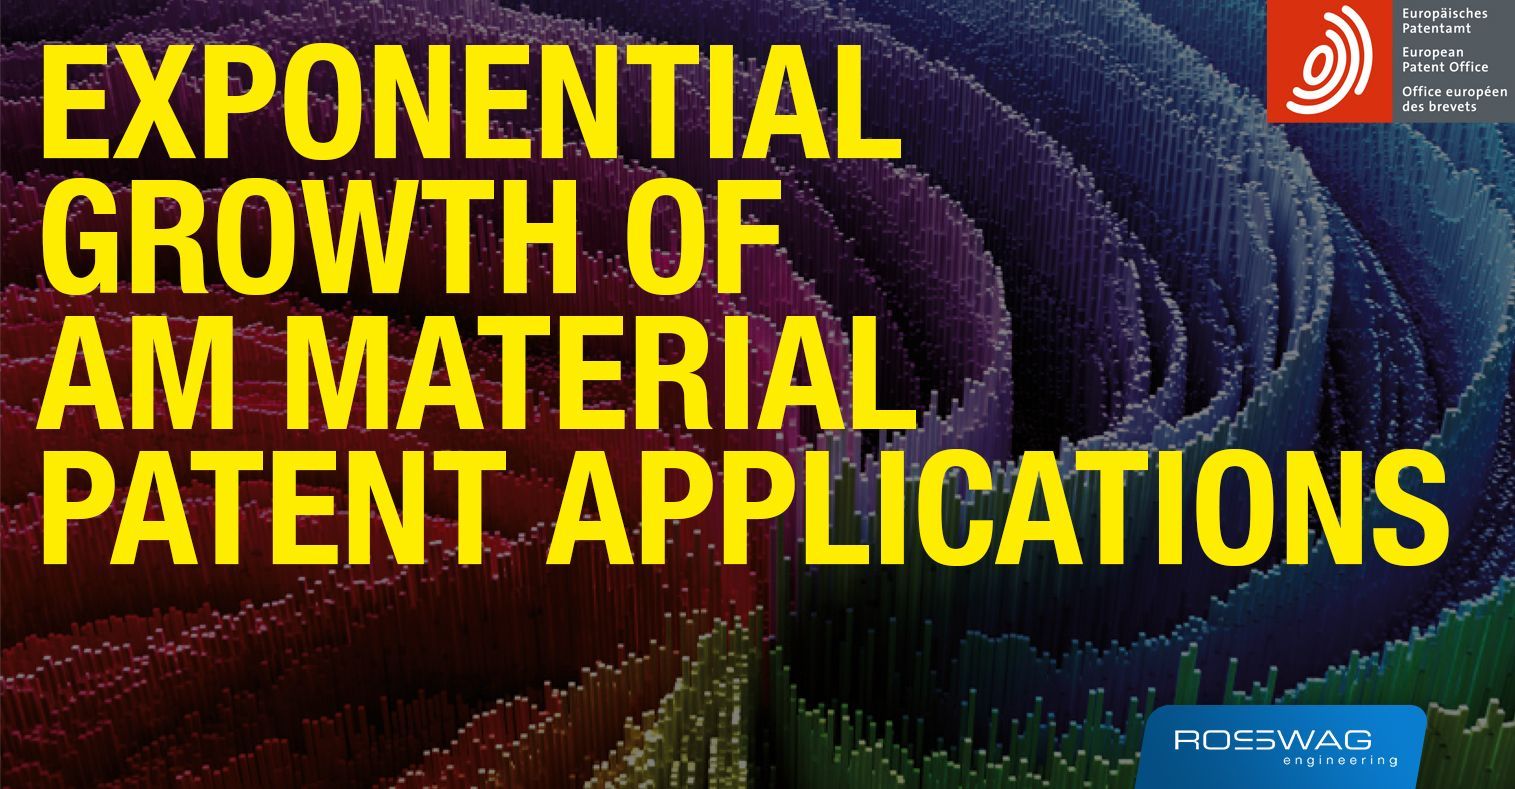 Rosswag_engineering_exponential_growth_of_am_material_patent_applications_01